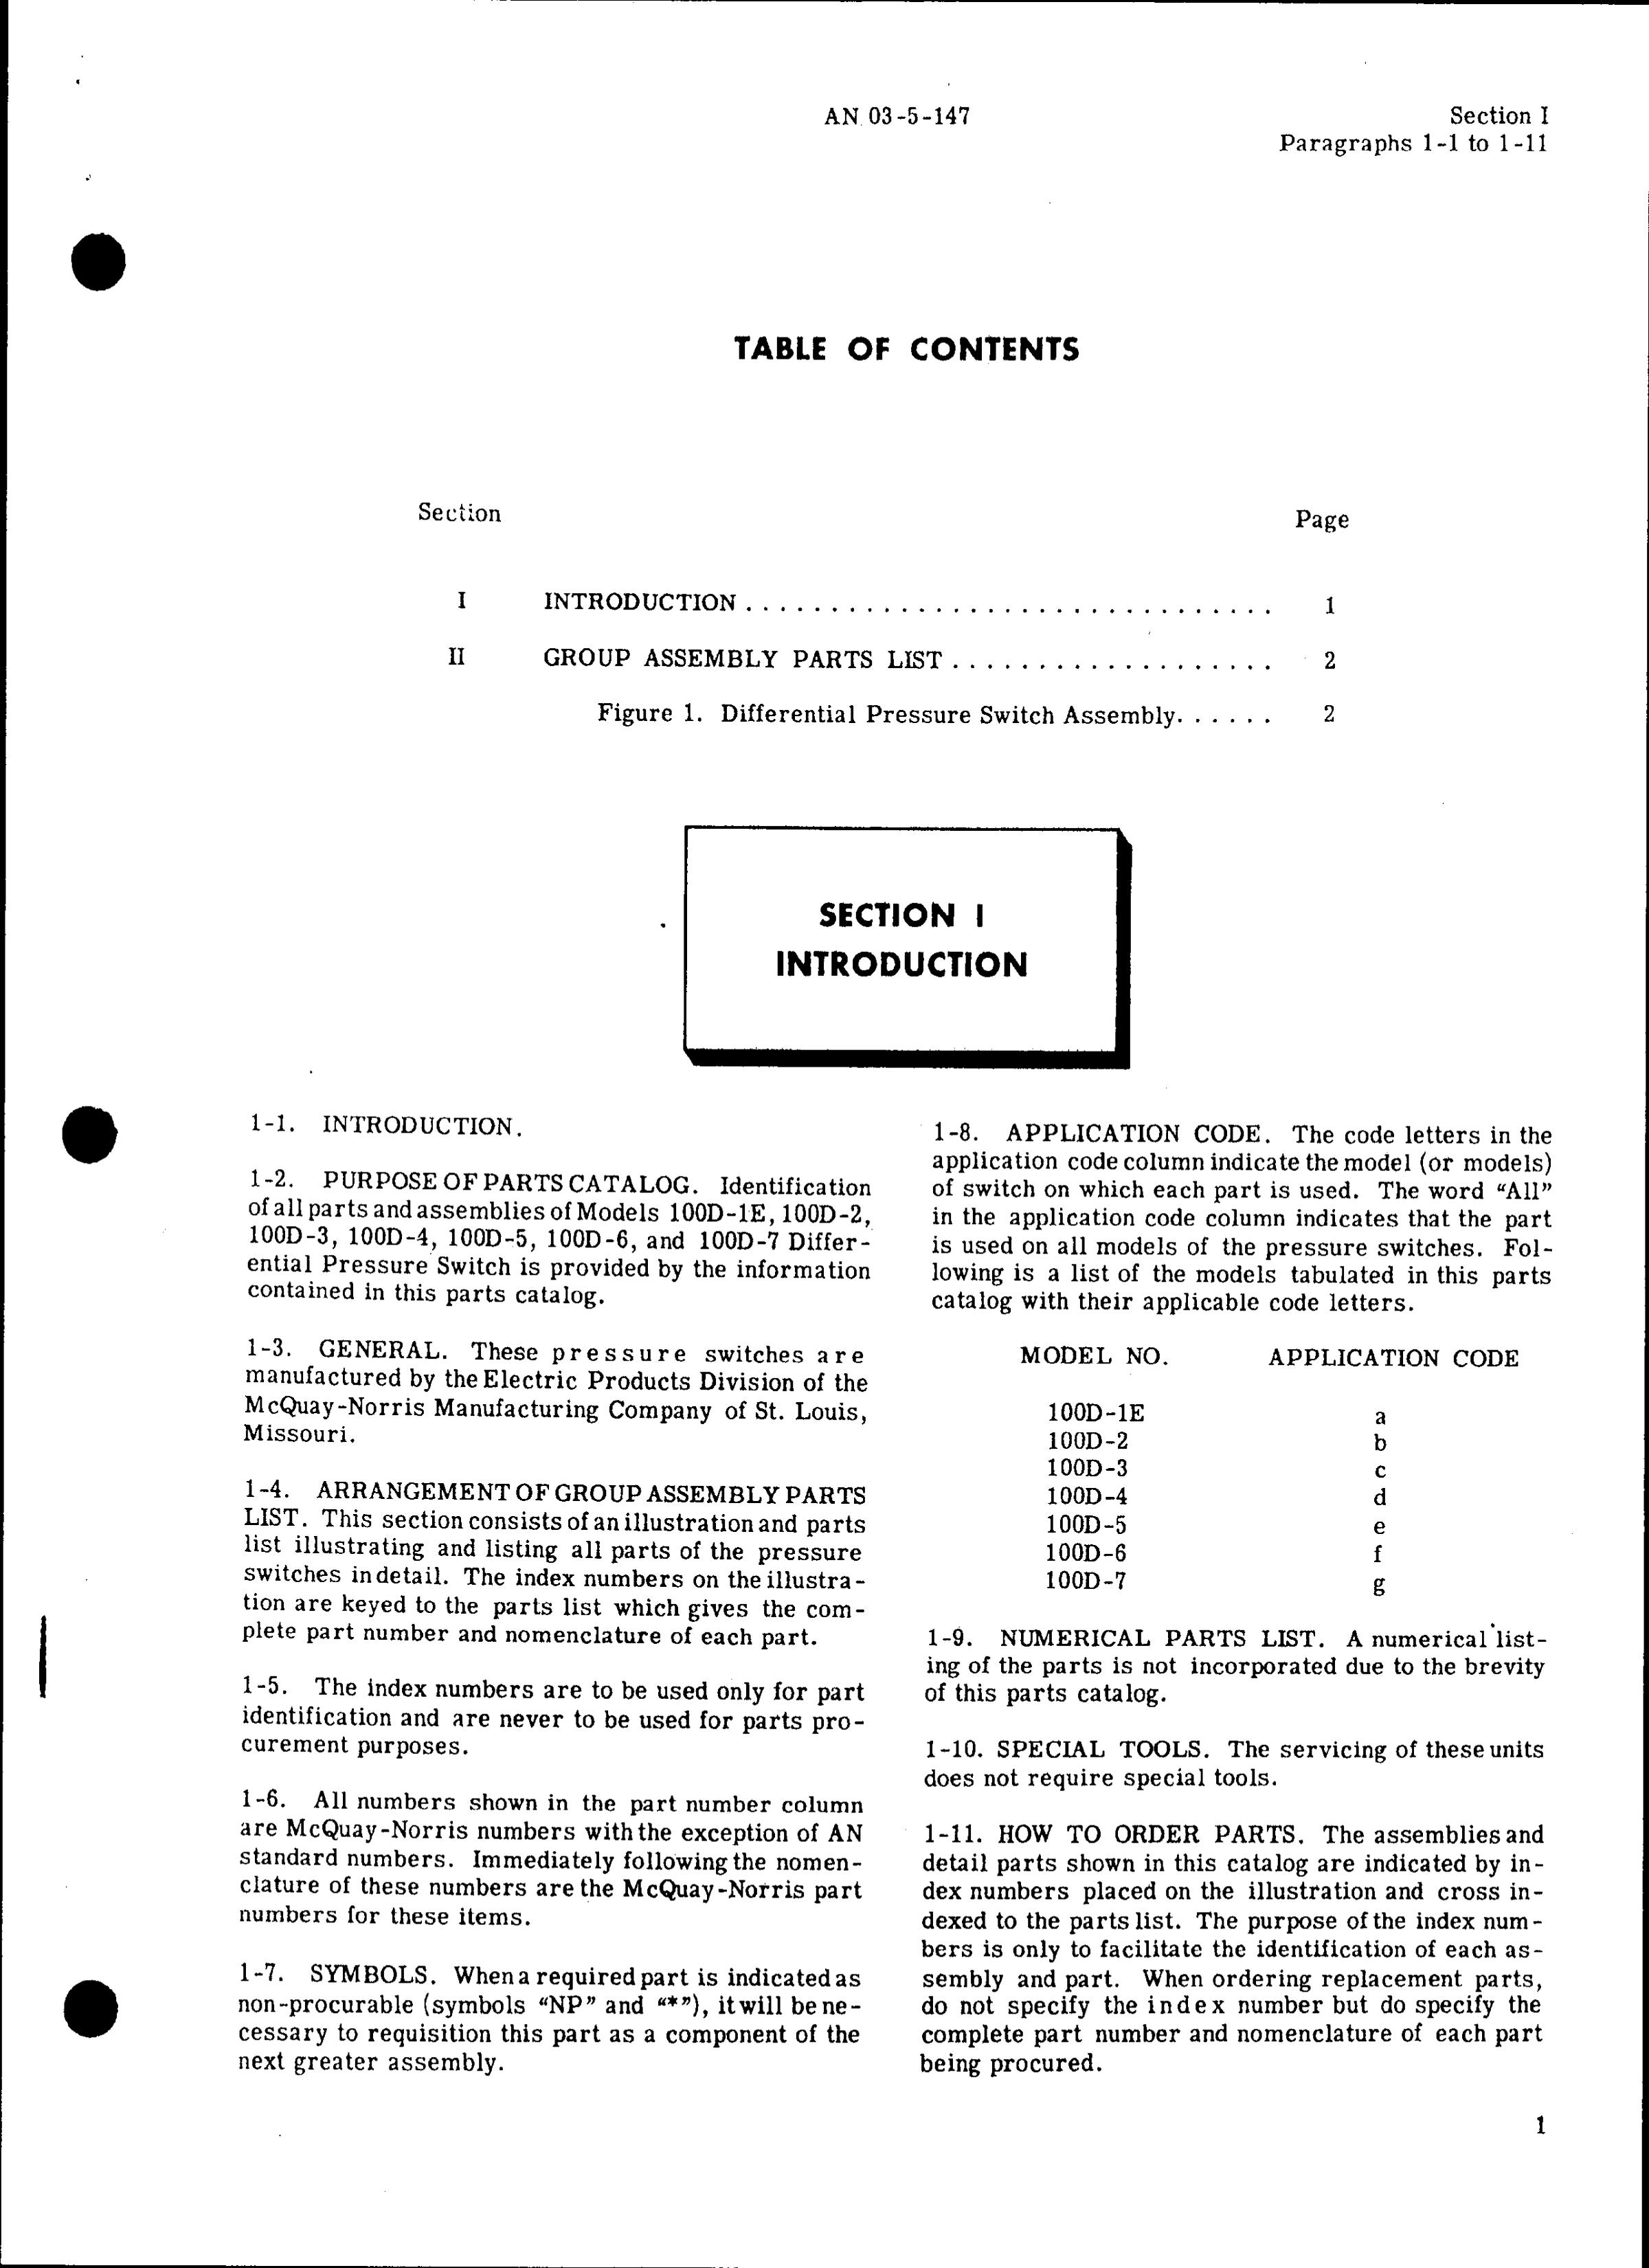 Sample page 3 from AirCorps Library document: Parts Catalog for Differential Pressure Switch (McQuay-Norris)